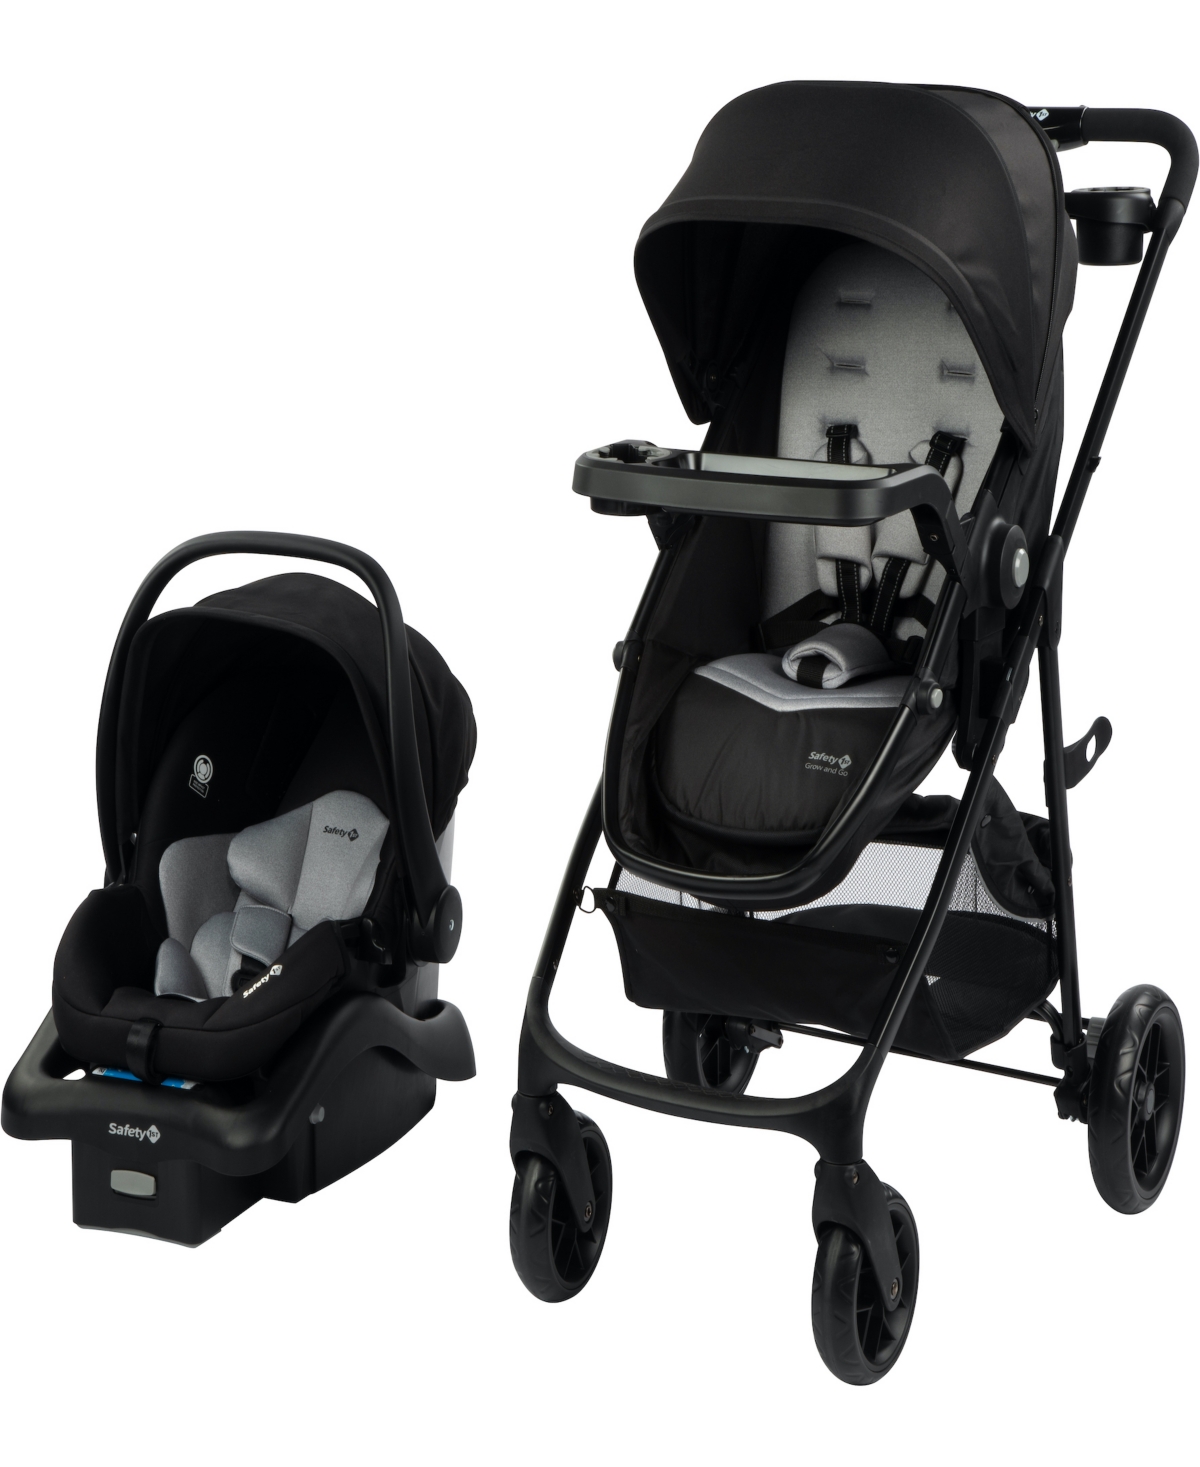 Safety 1st Baby Grow And Go Flex 8-in-1 Travel System In Foundry